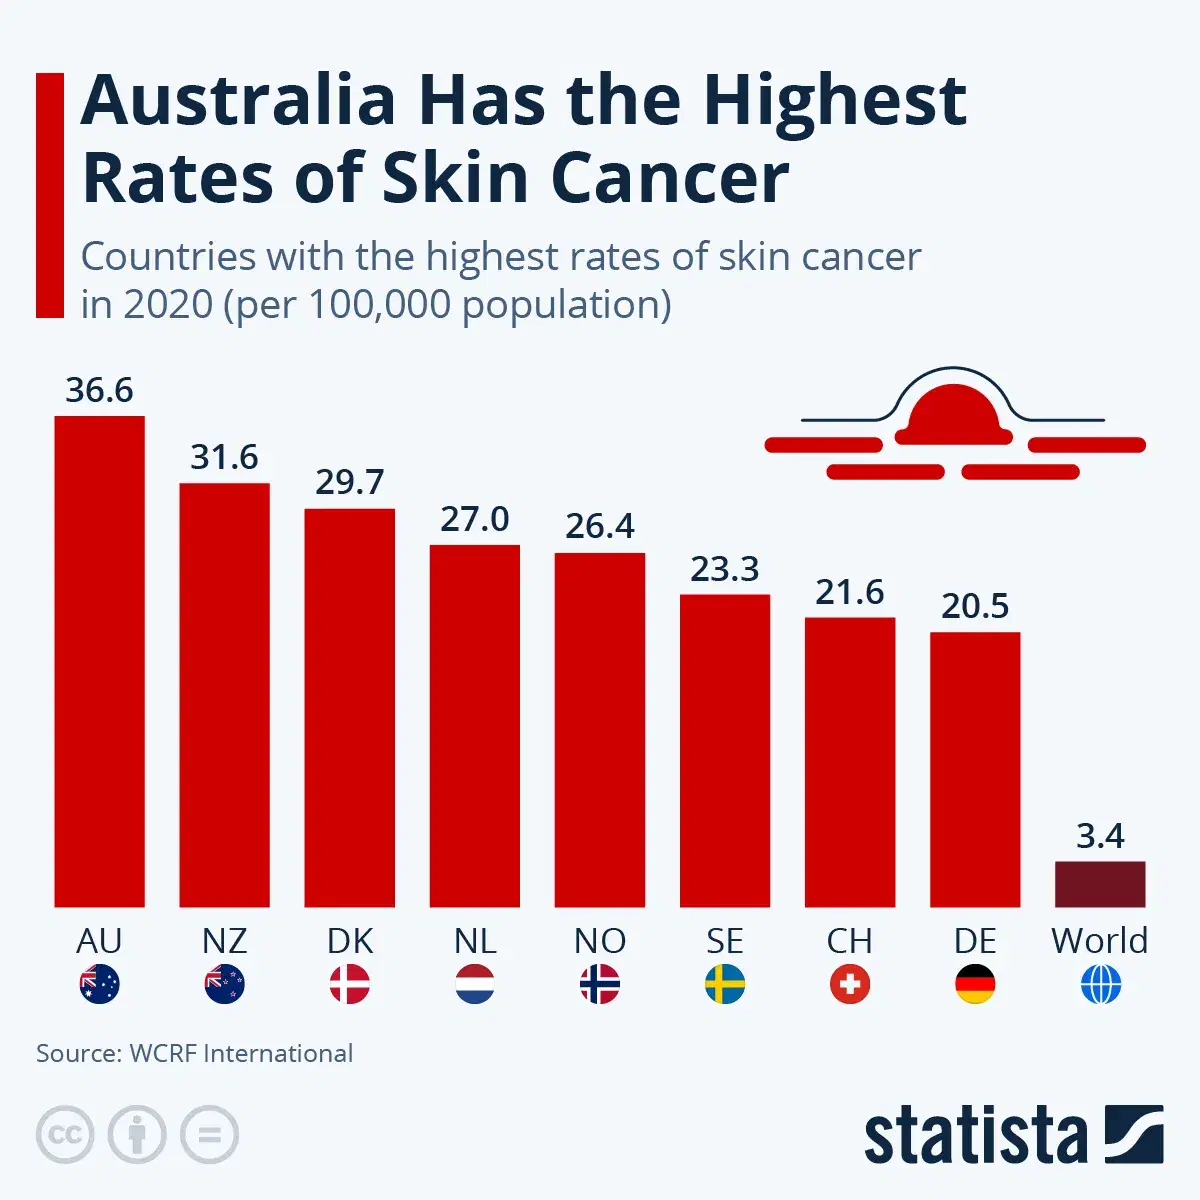 Australia Has the Highest Rates of Skin Cancer